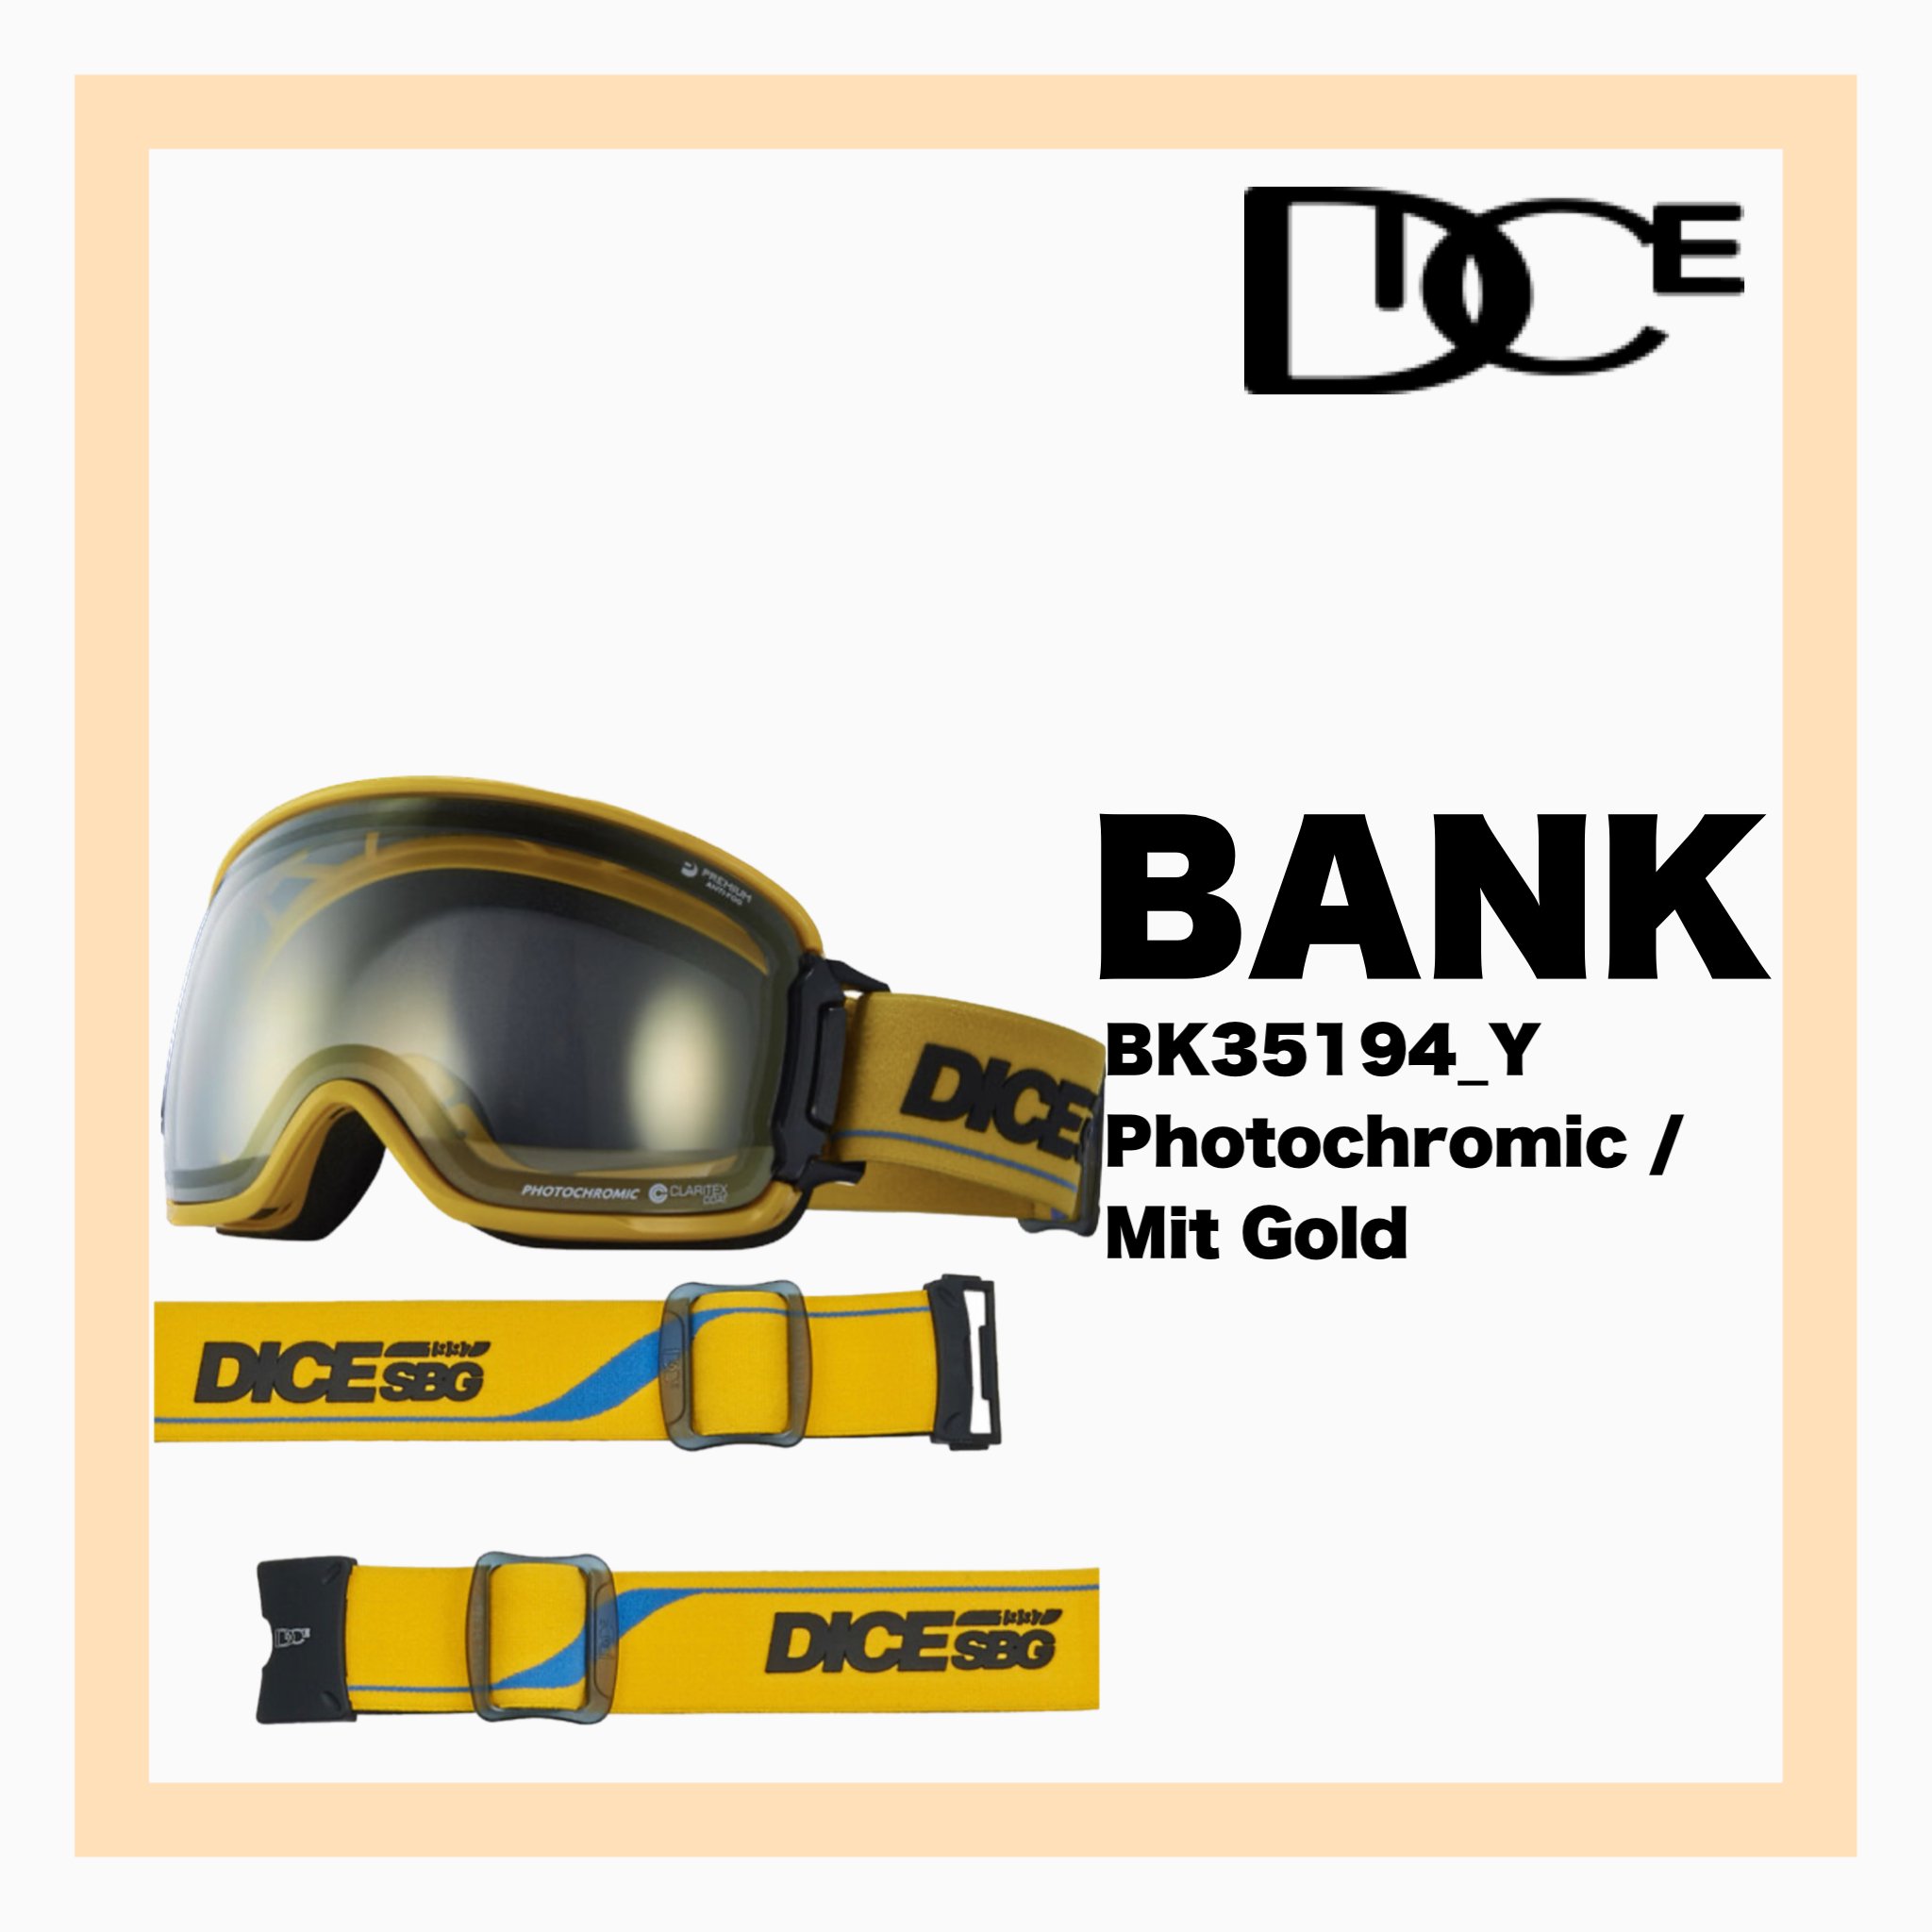 <img class='new_mark_img1' src='https://img.shop-pro.jp/img/new/icons34.gif' style='border:none;display:inline;margin:0px;padding:0px;width:auto;' />DICE BANK Y  Photochromic / Mit Gold